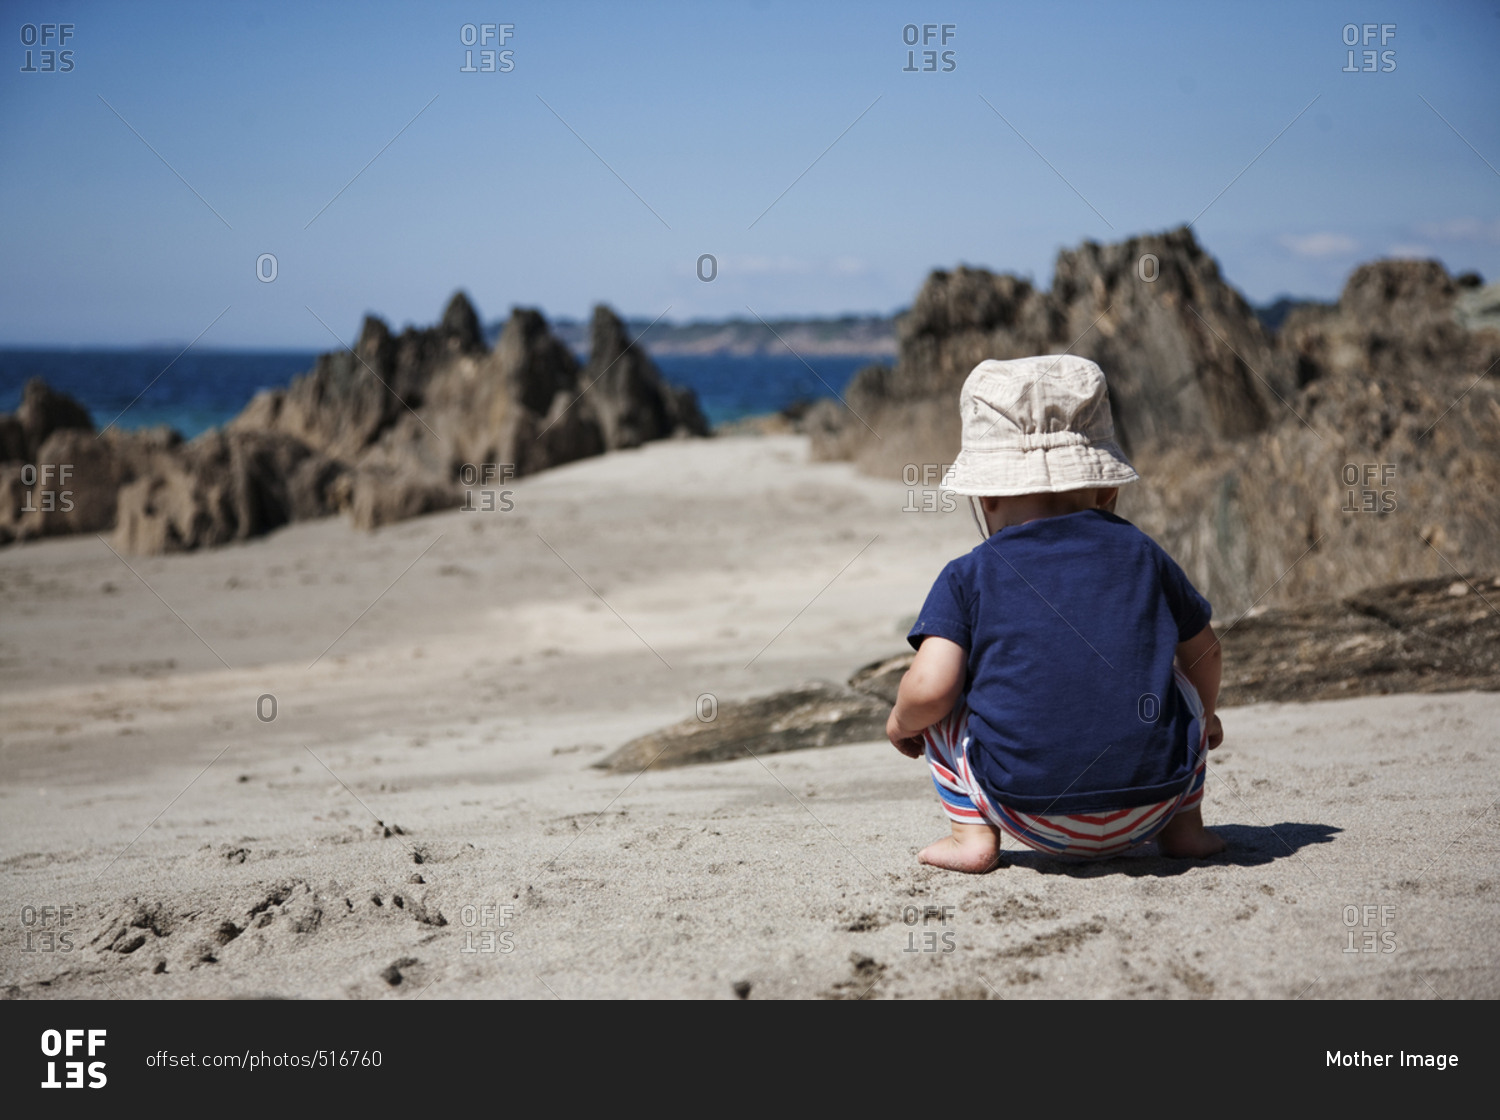 Baby boy playing on beach facing away from camera, France